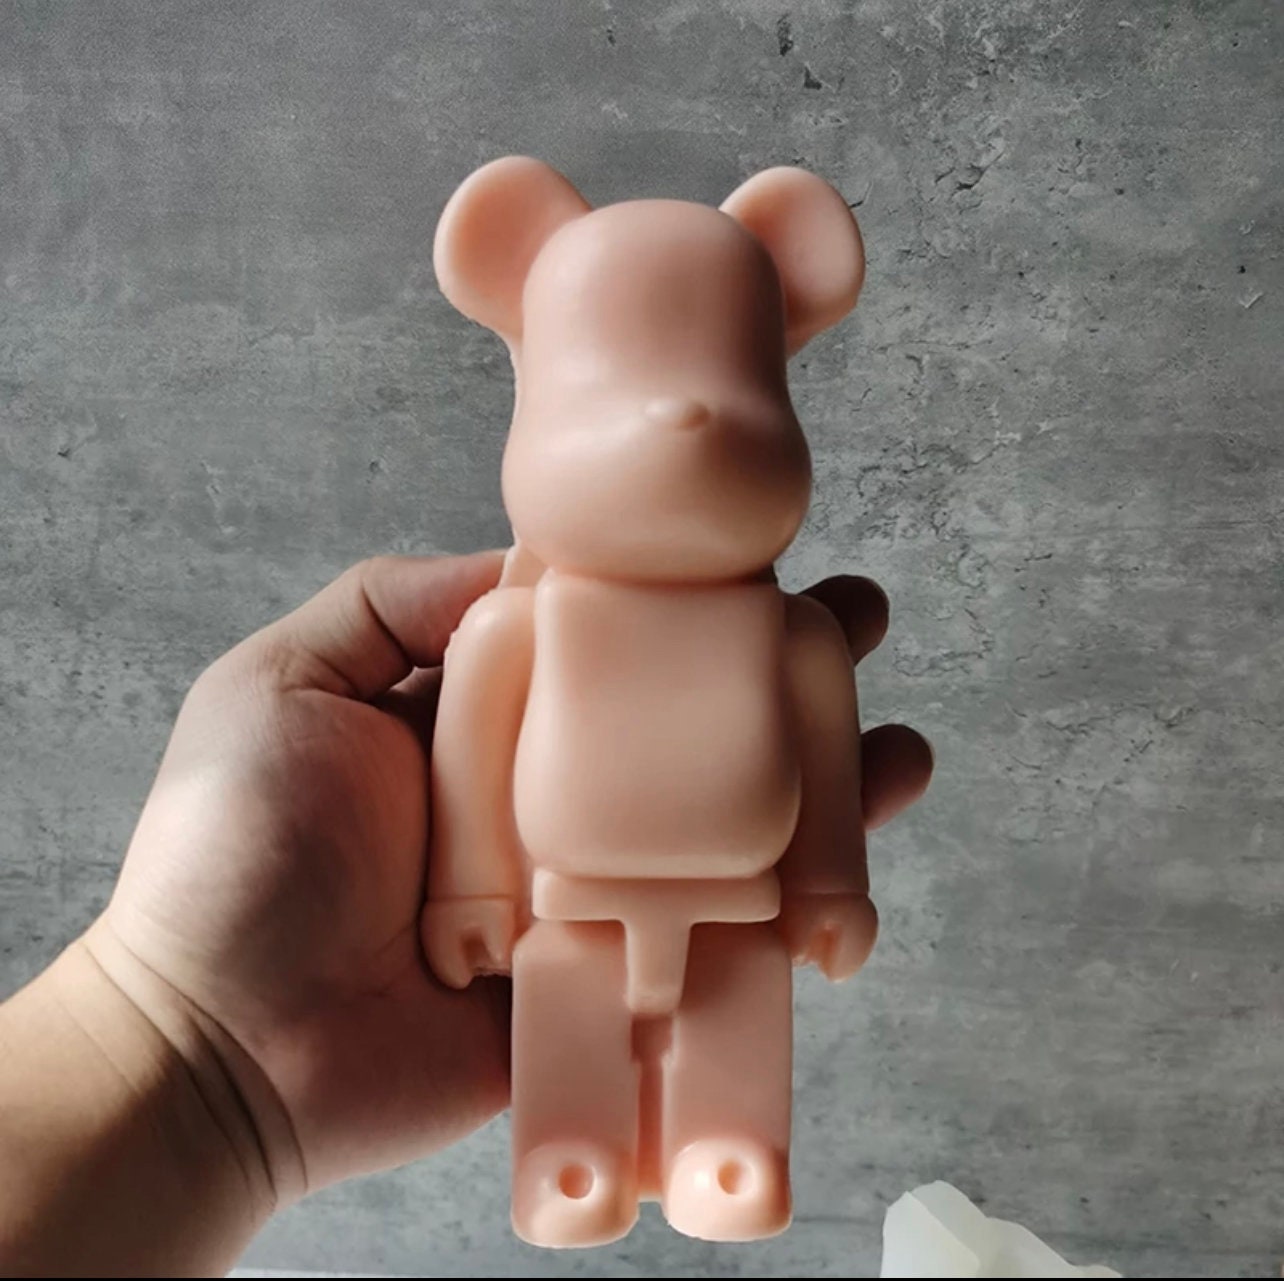 Bearbrick Moulage en silicone faite à la main, candle Wax Soap Plaster  Resin Polymer Clay Candy Chocolate Cake -  France